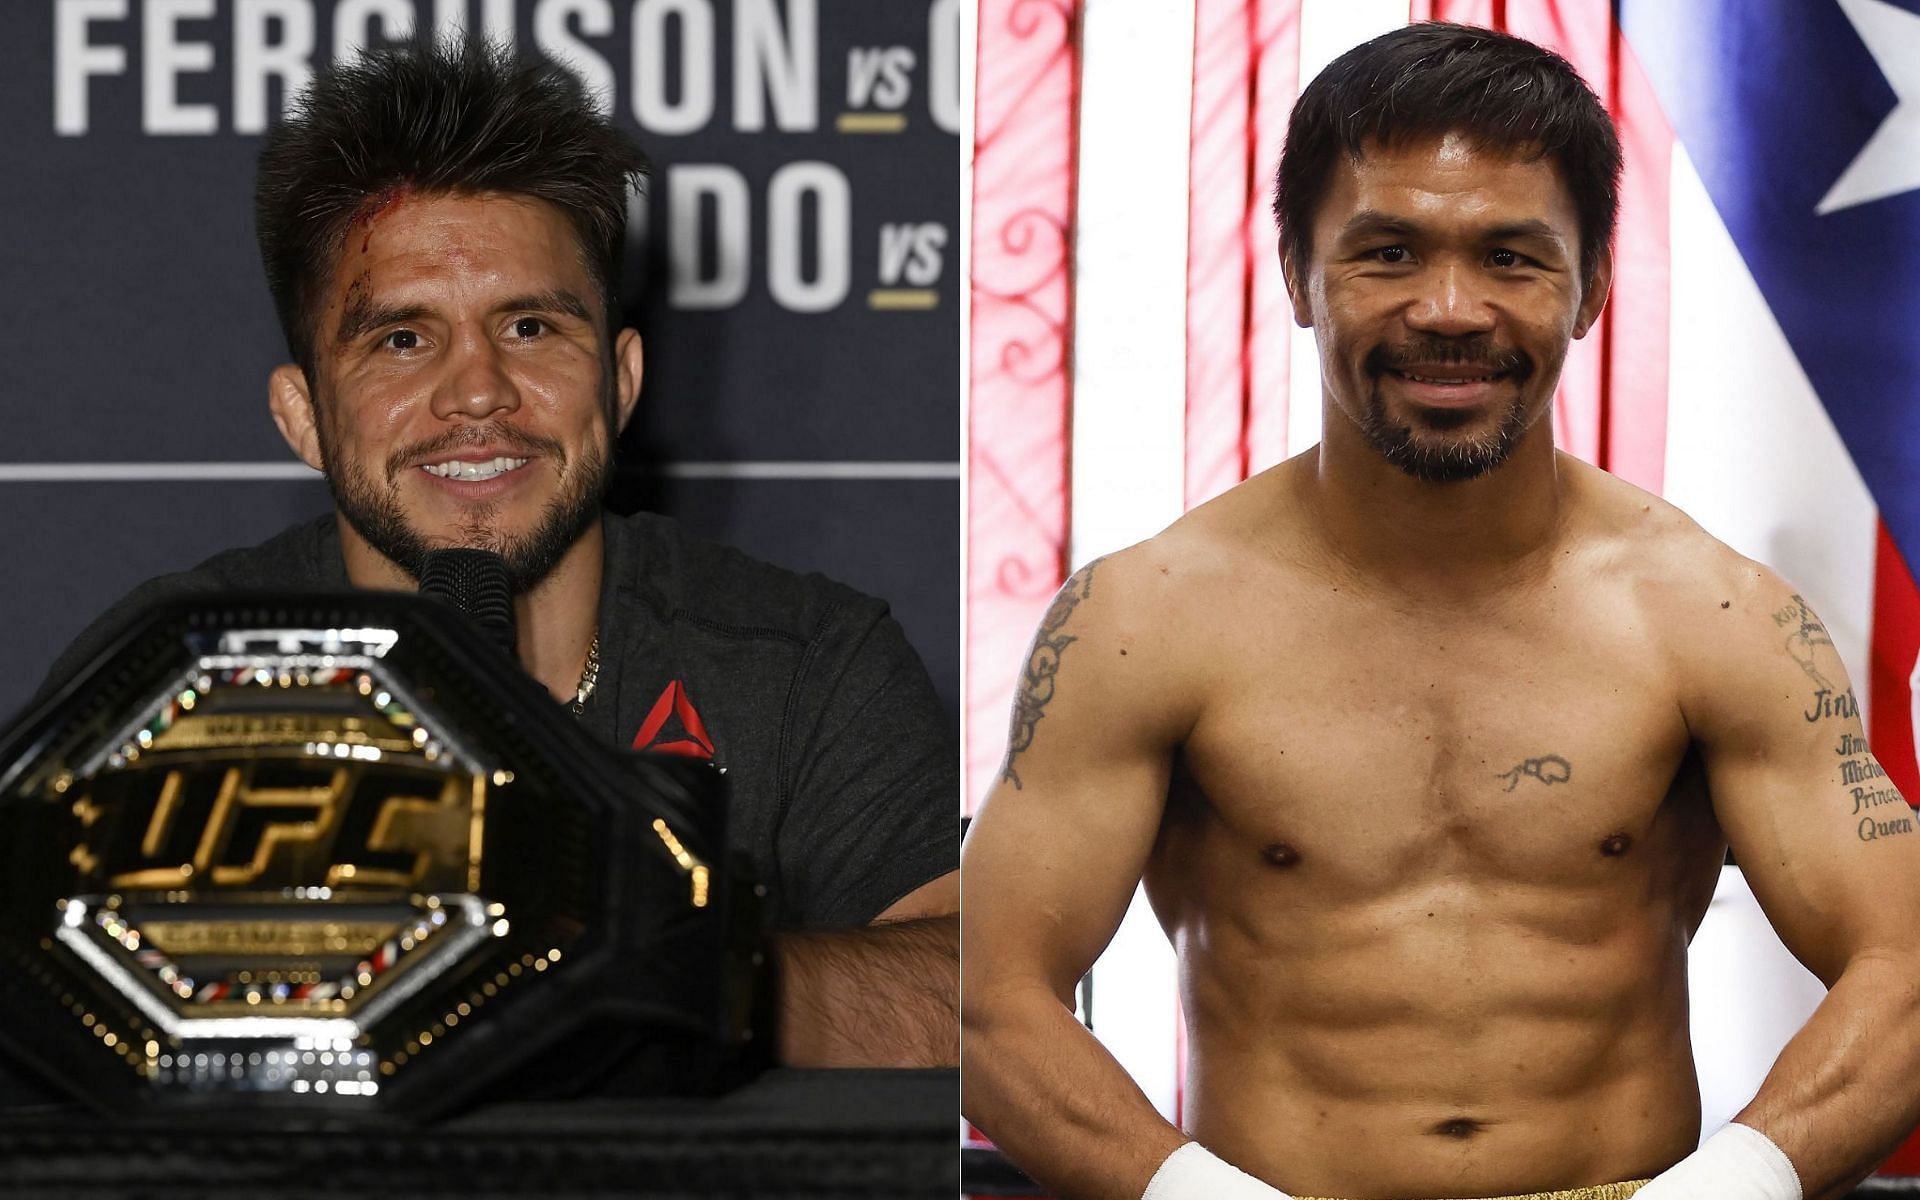 Henry Cejudo (left) and Manny Pacquiao (right)